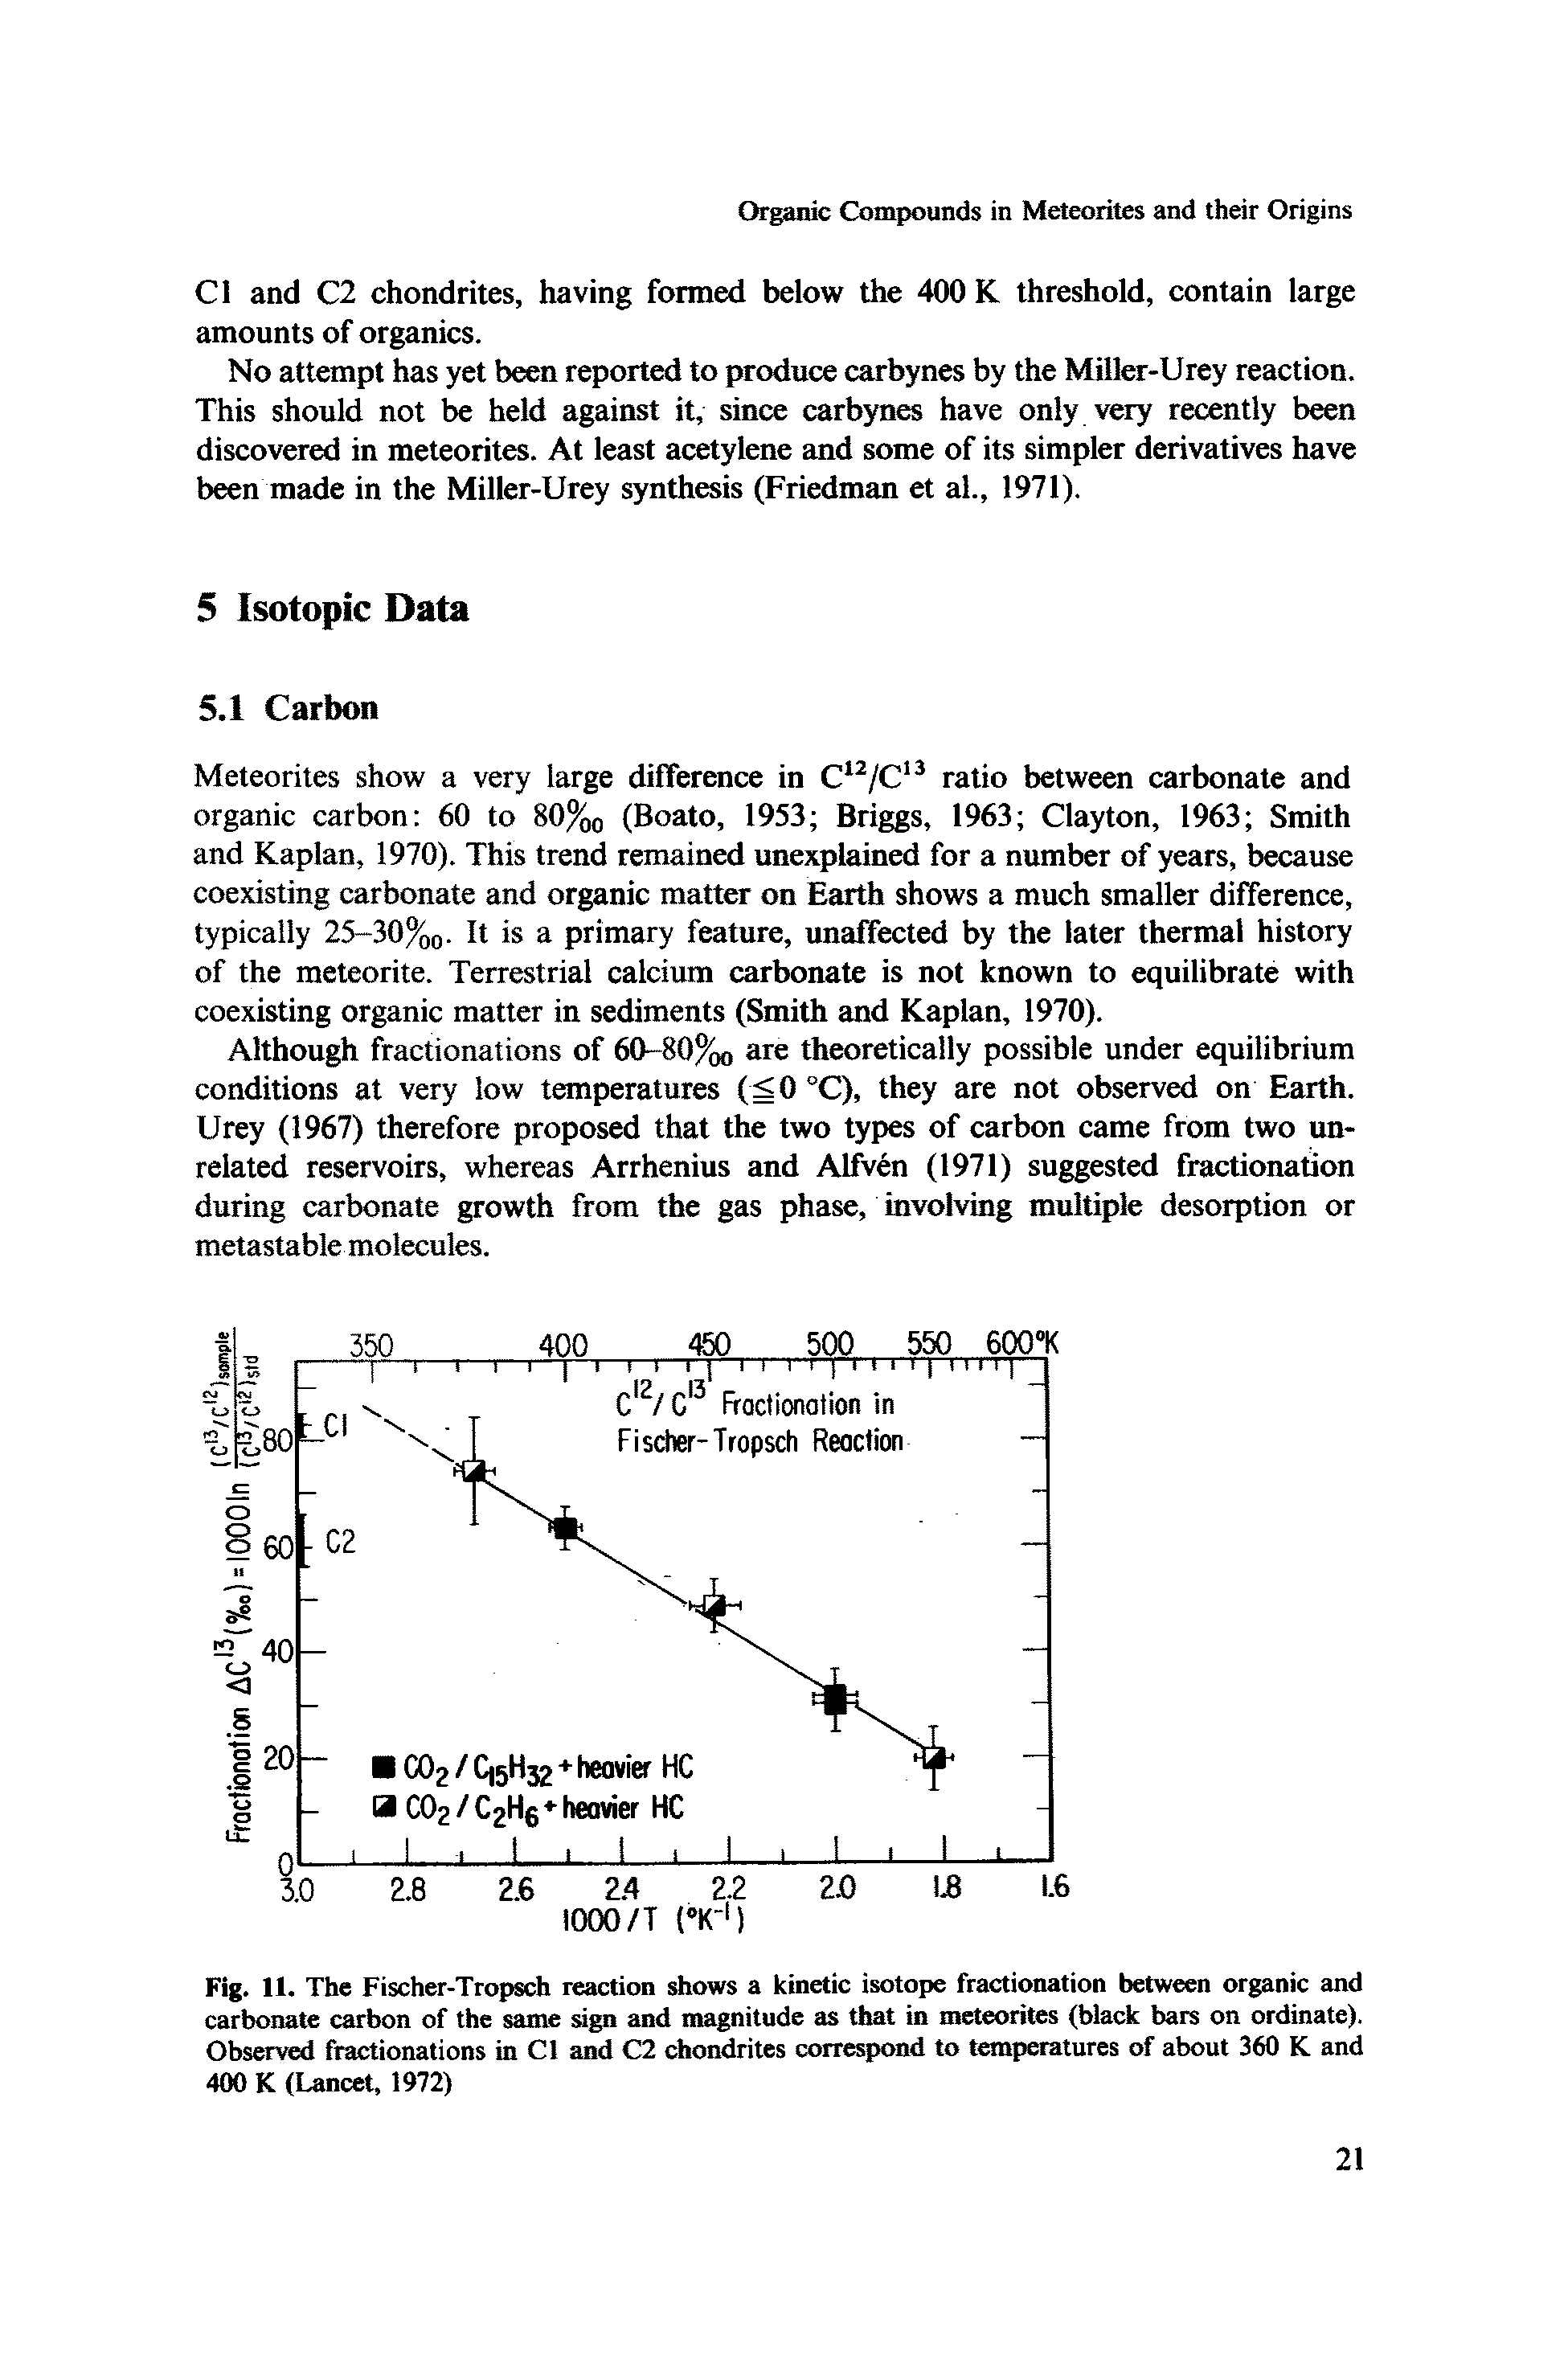 Fig. 11. The Fischer-Tropsch reaction shows a kinetic isotope fractionation between organic and carbonate carbon of the same sign and magnitude as that in meteorites (black bars on ordinate). Observed fractionations in Cl and C2 chondrites correspond to temperatures of about 360 K and 400 K (Uncet, 1972)...